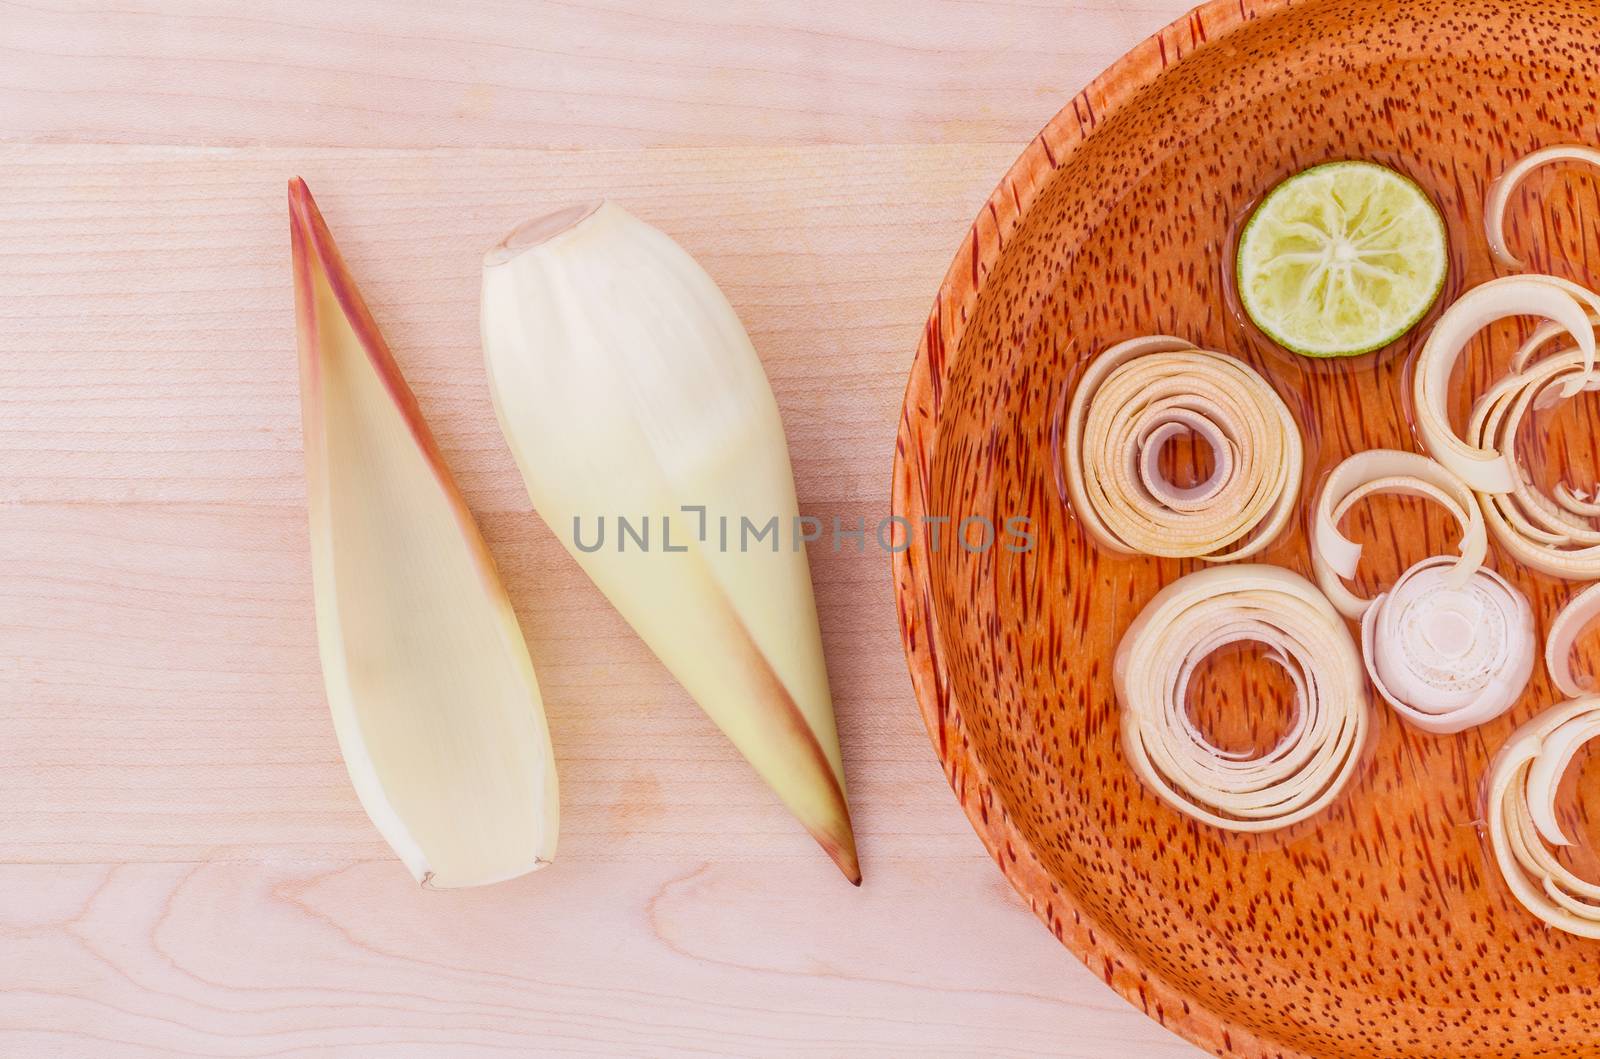 Banana blossom healthy vegetable alternative and clean food on wooden panel.